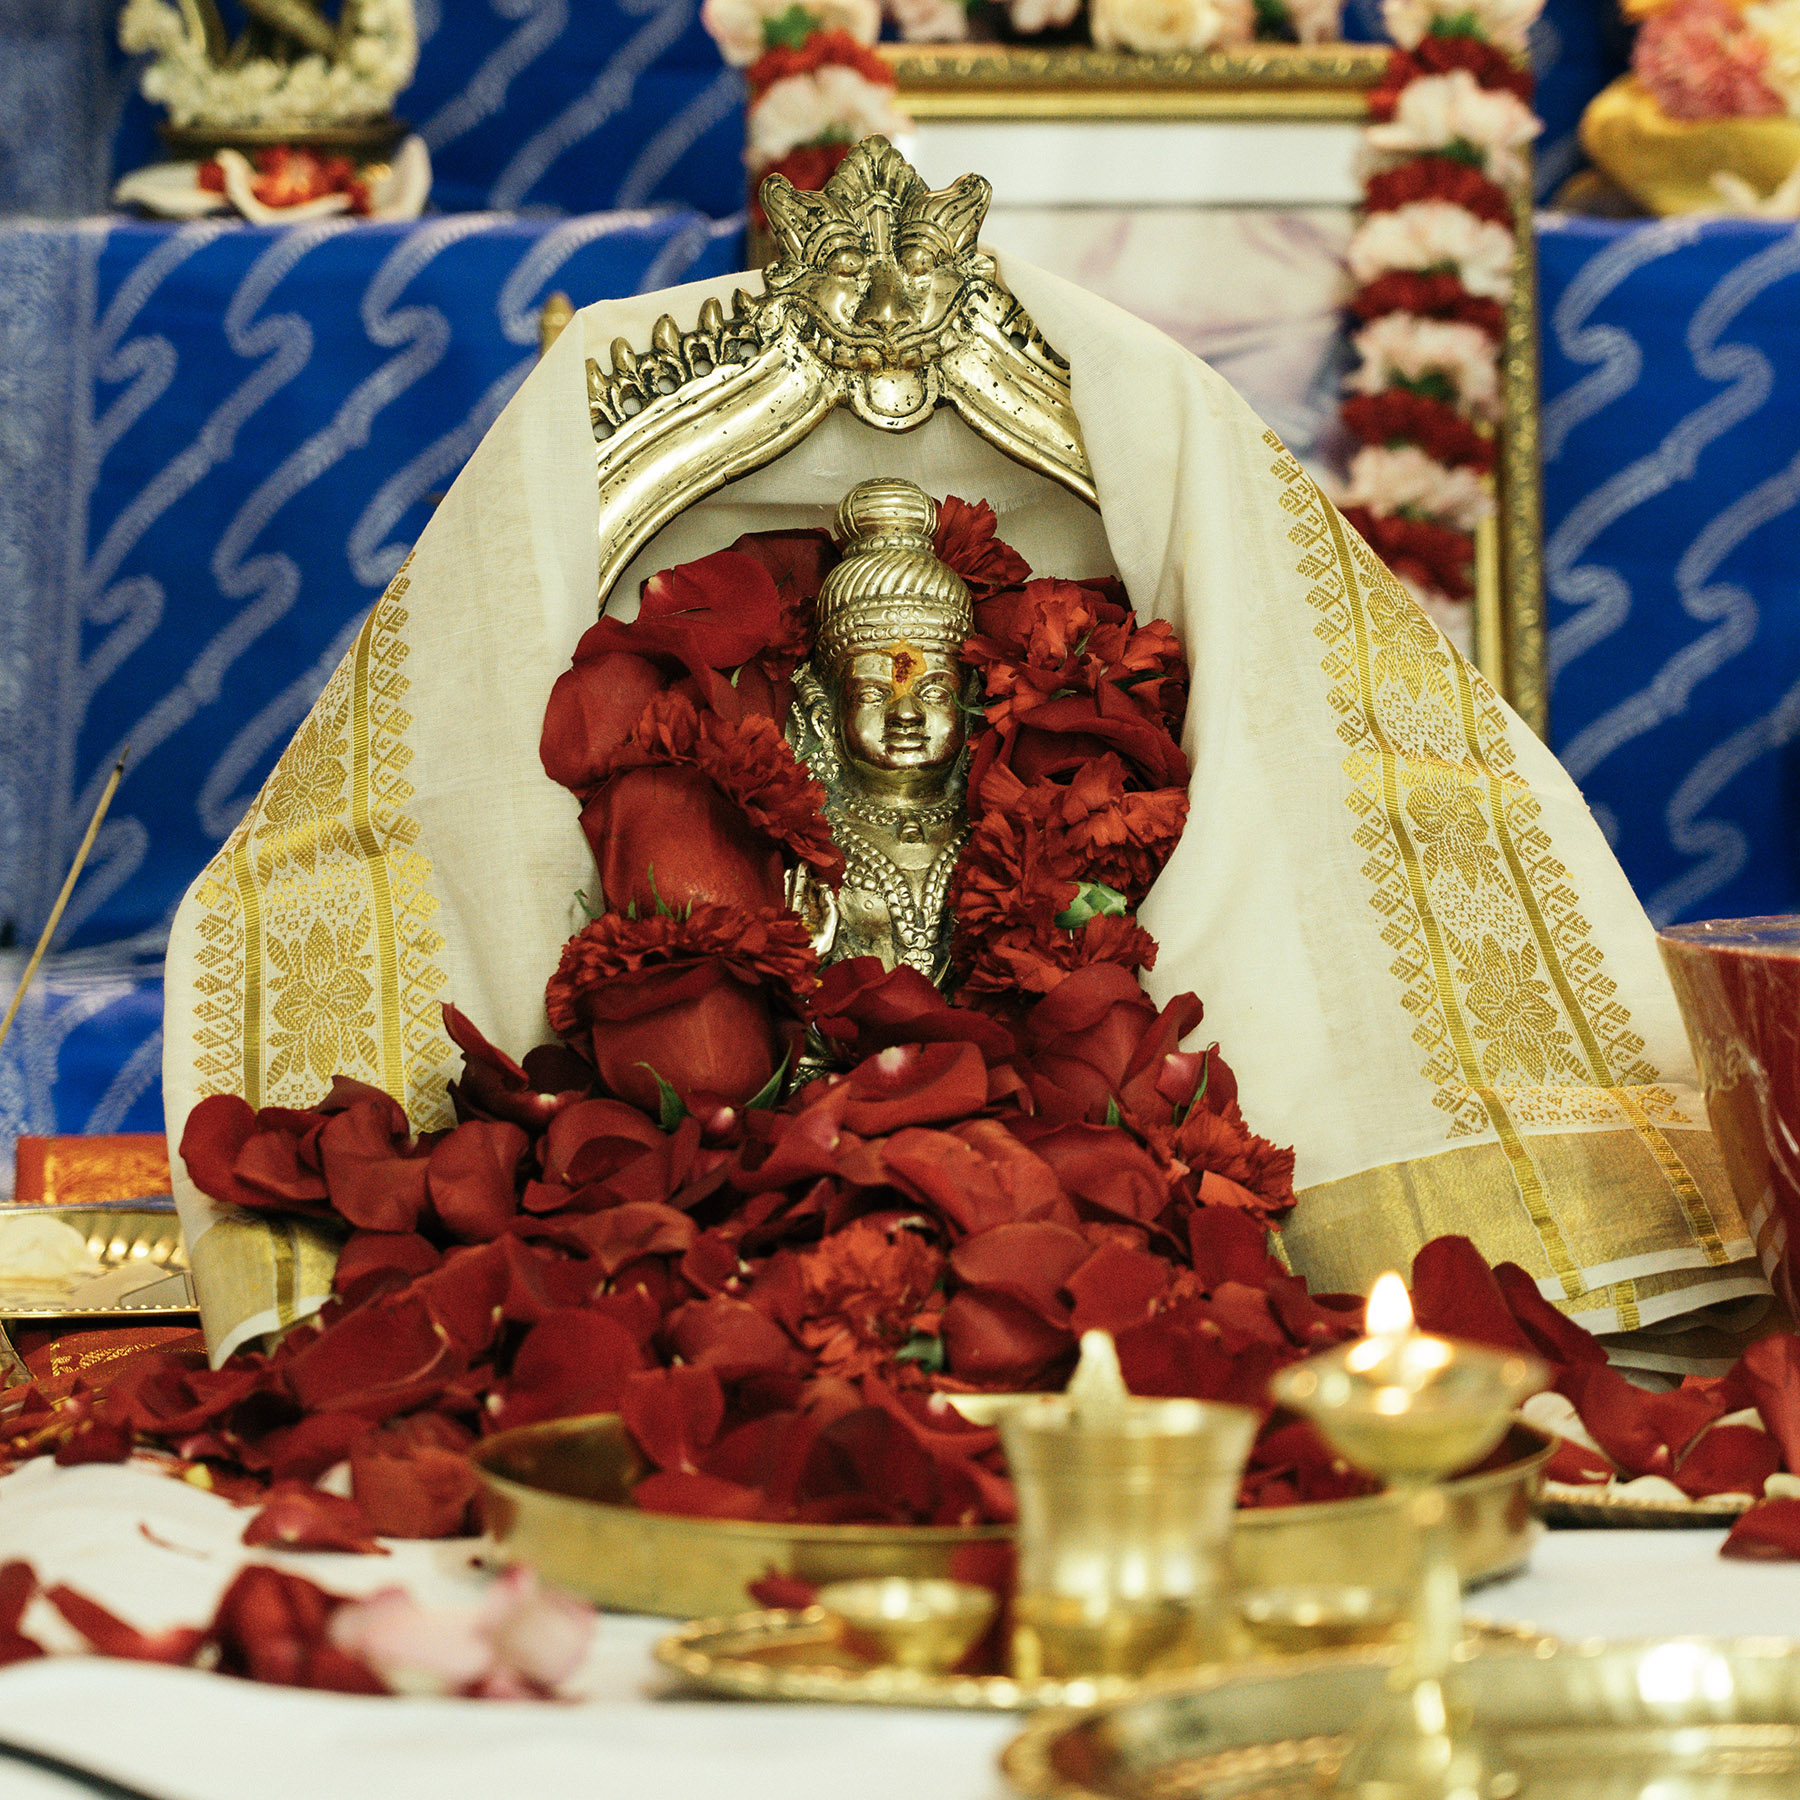 Ayyappa statue with garland of red flowers